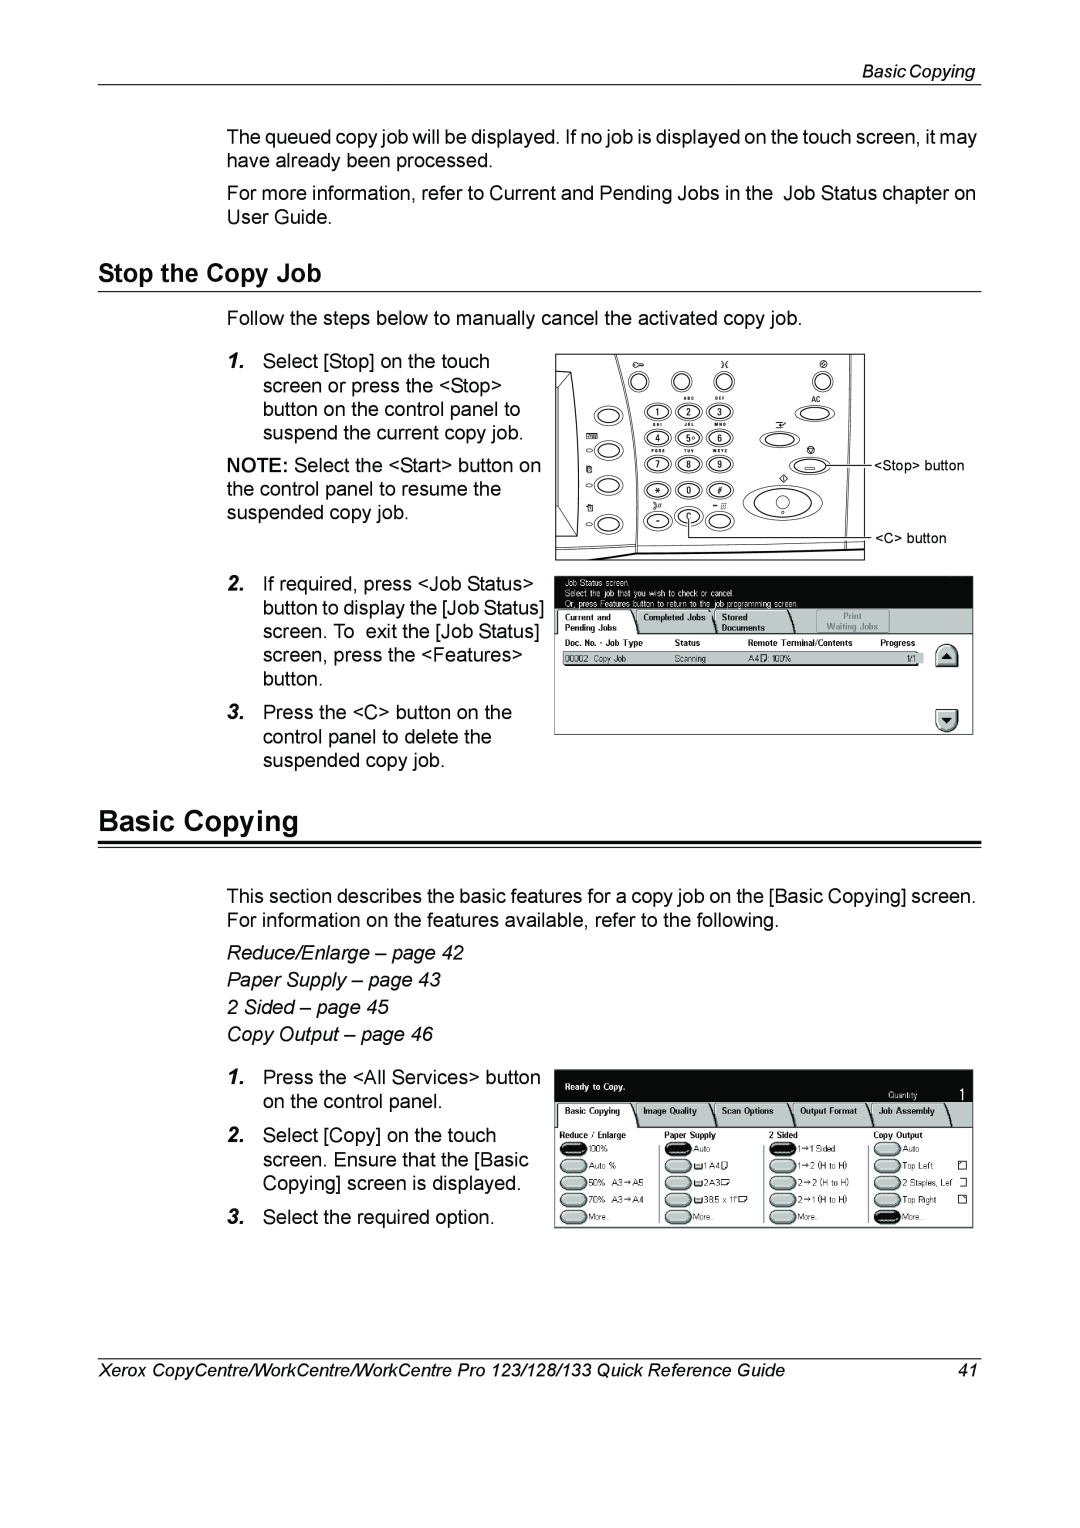 Xerox 604P18037 manual Basic Copying, Stop the Copy Job, Reduce/Enlarge - page 42 Paper Supply - page 43 2 Sided - page 